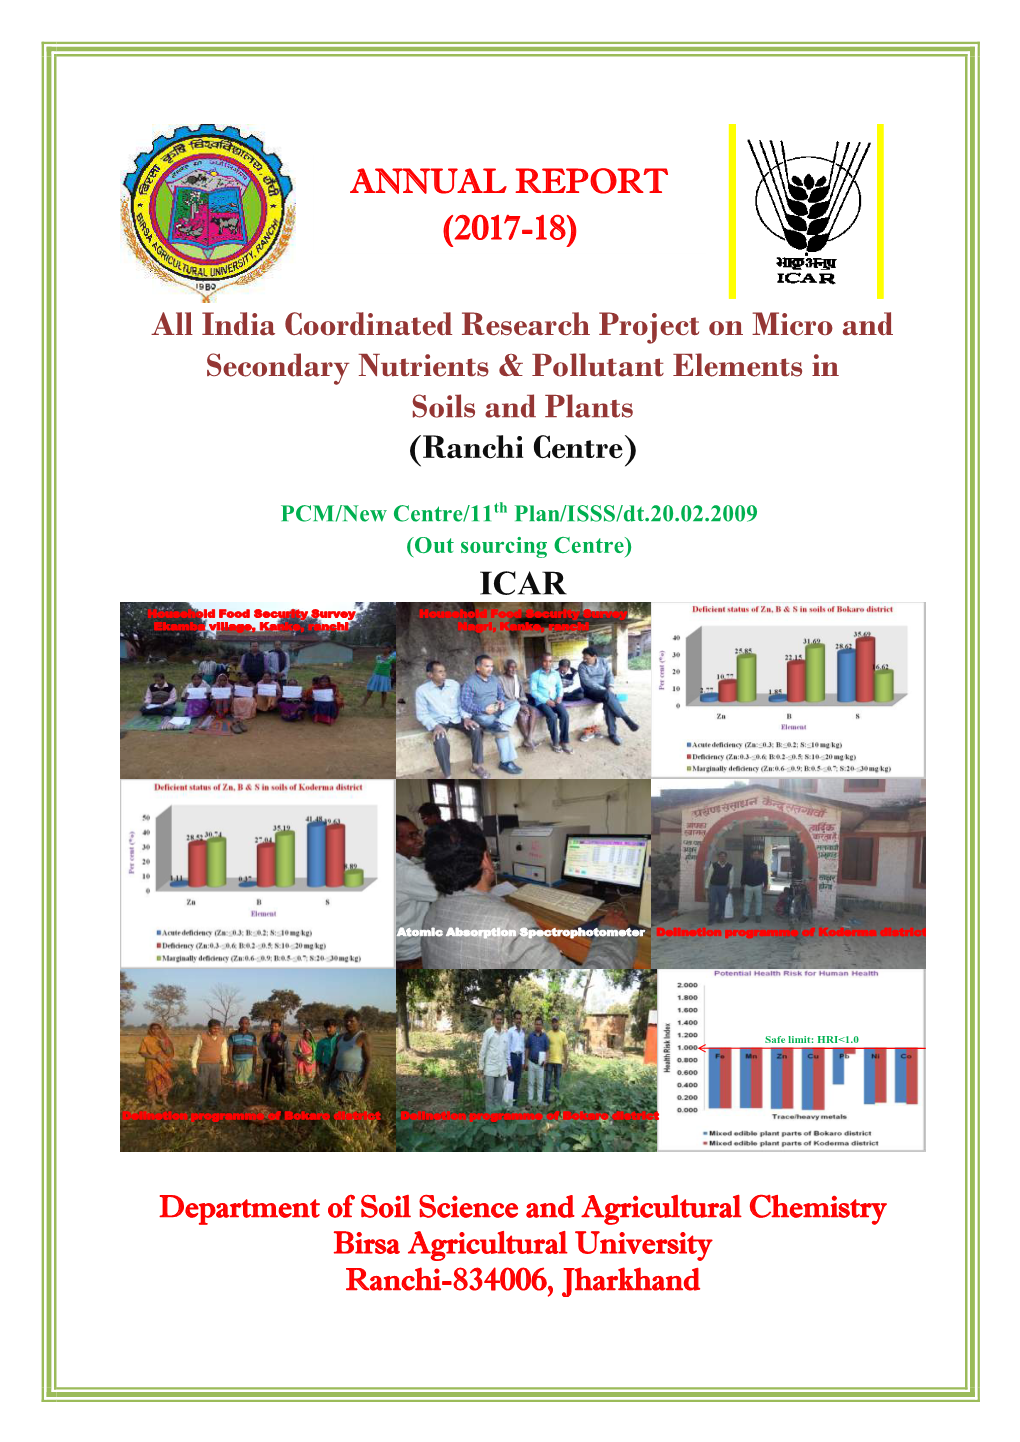 All India Coordinated Research Project on Micro and Secondary Nutrients & Pollutant Elements in Soils and Plants (Ranchi Centre)